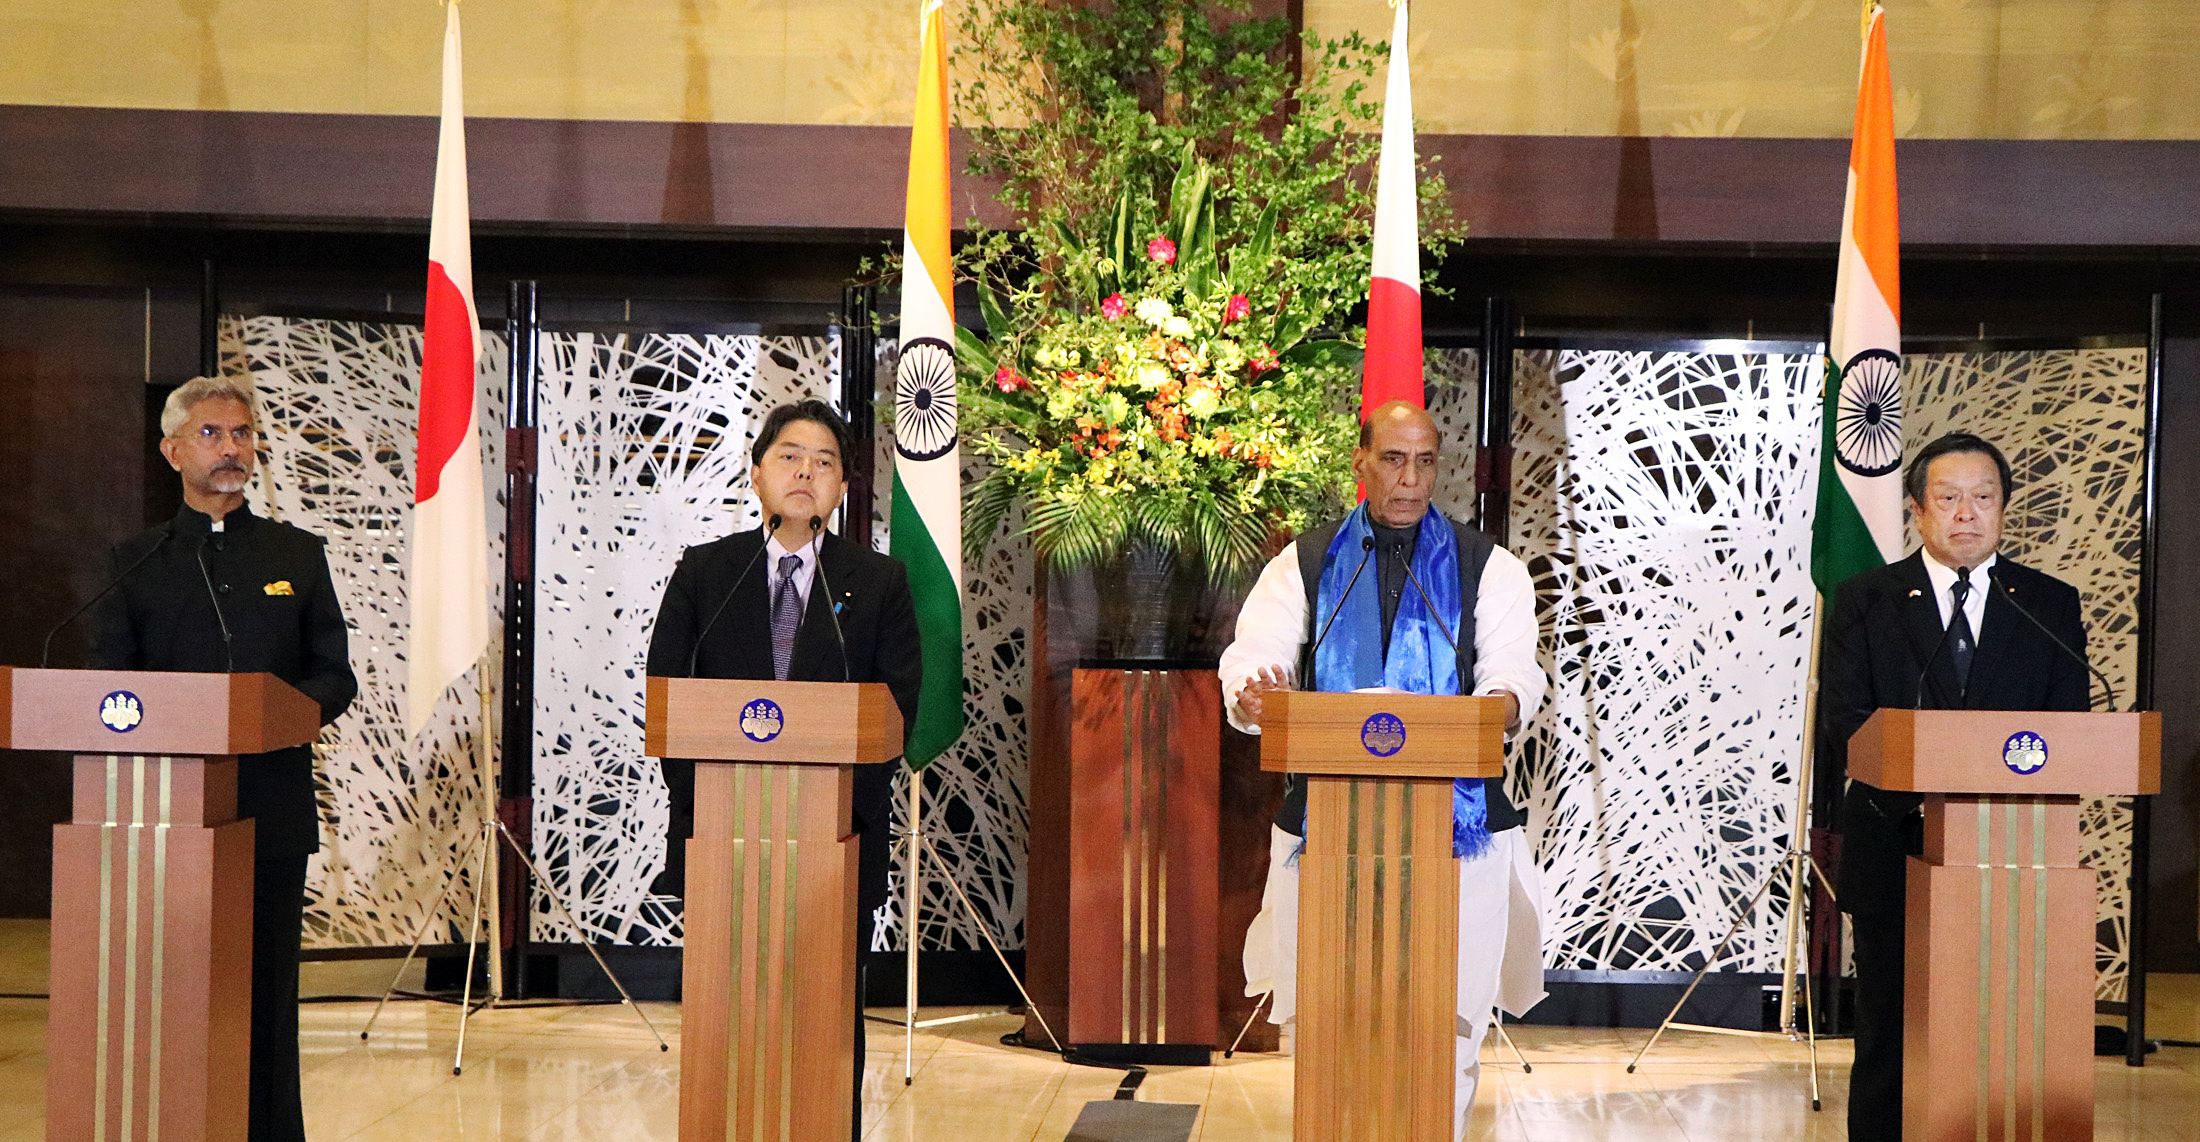 2+2 in Tokyo: With eye on China, India and Japan plan to strengthen defense ties